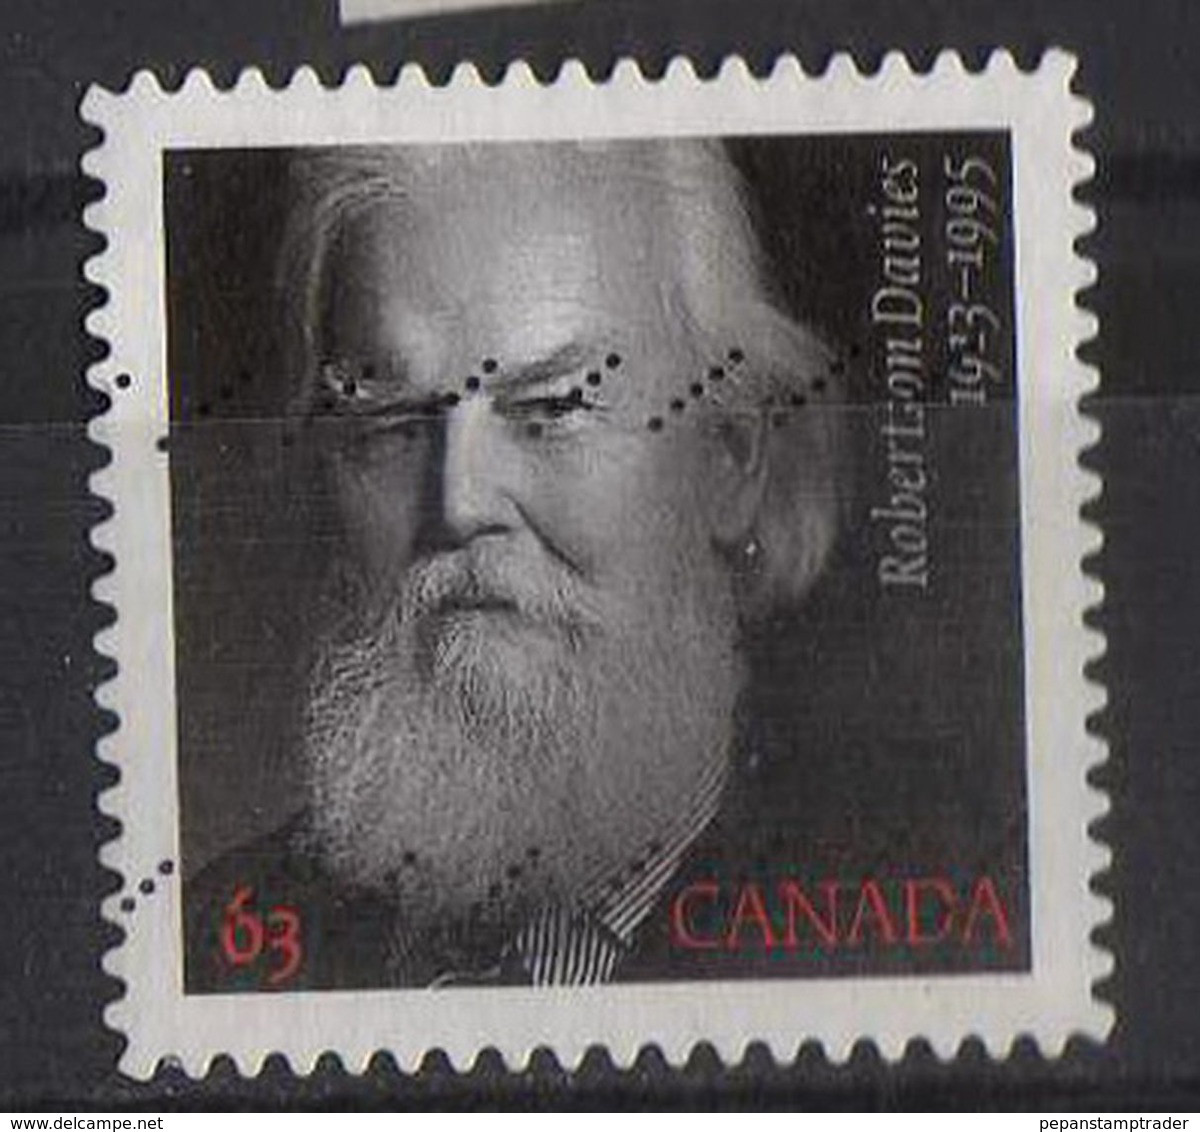 Canada - #2660 - Used - Used Stamps